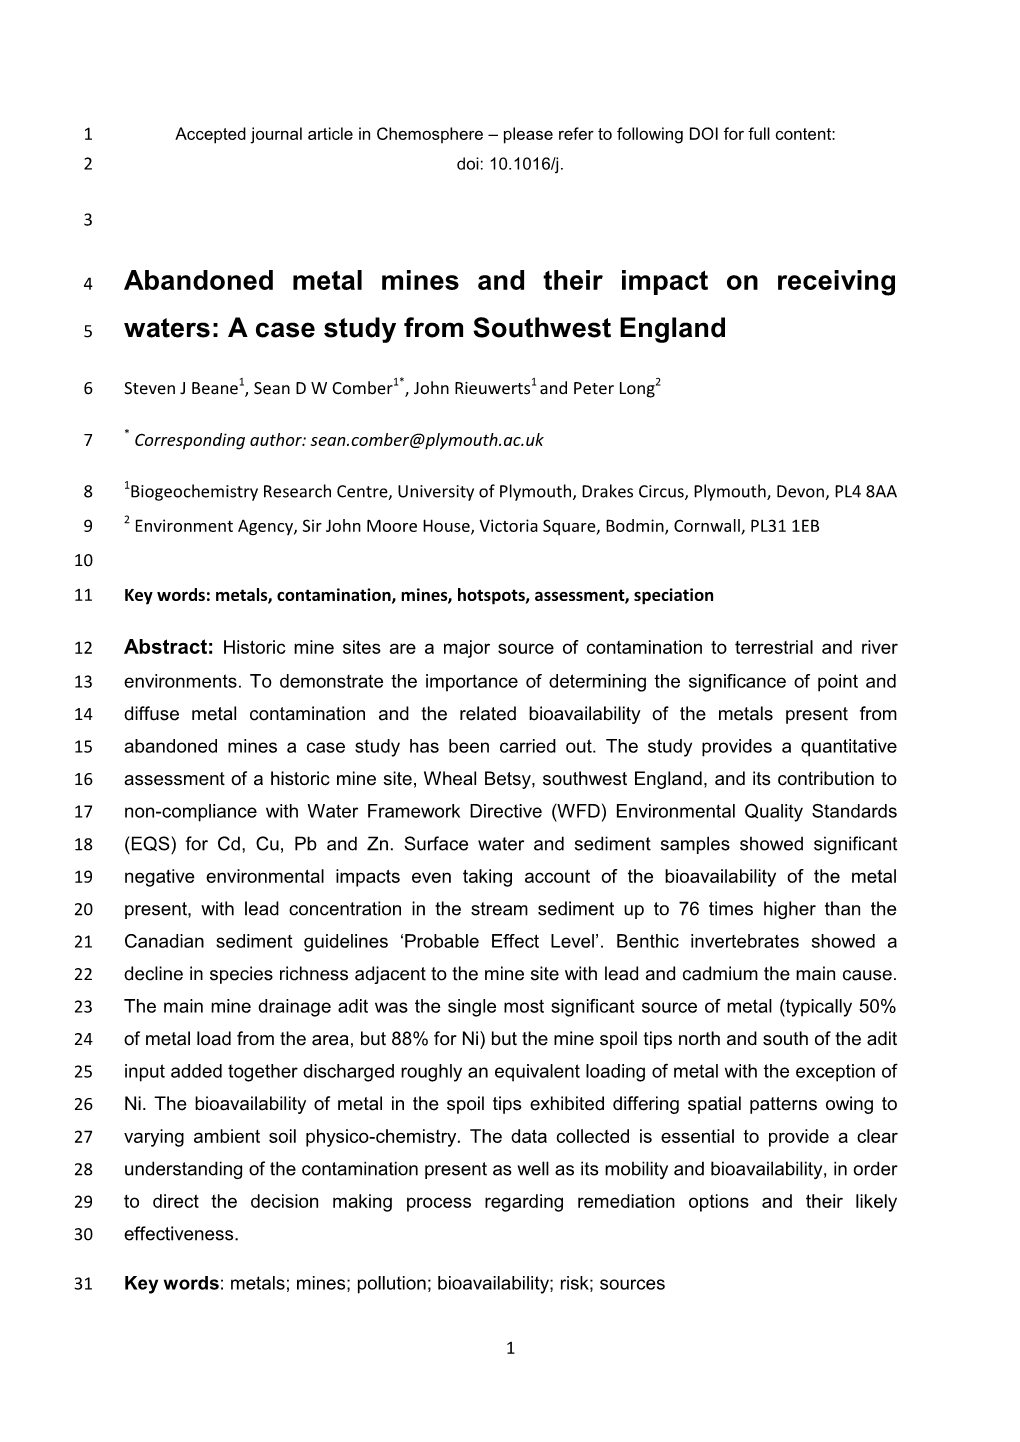 Abandoned Metal Mines and Their Impact on Receiving Waters: a Case Study from Southwest England